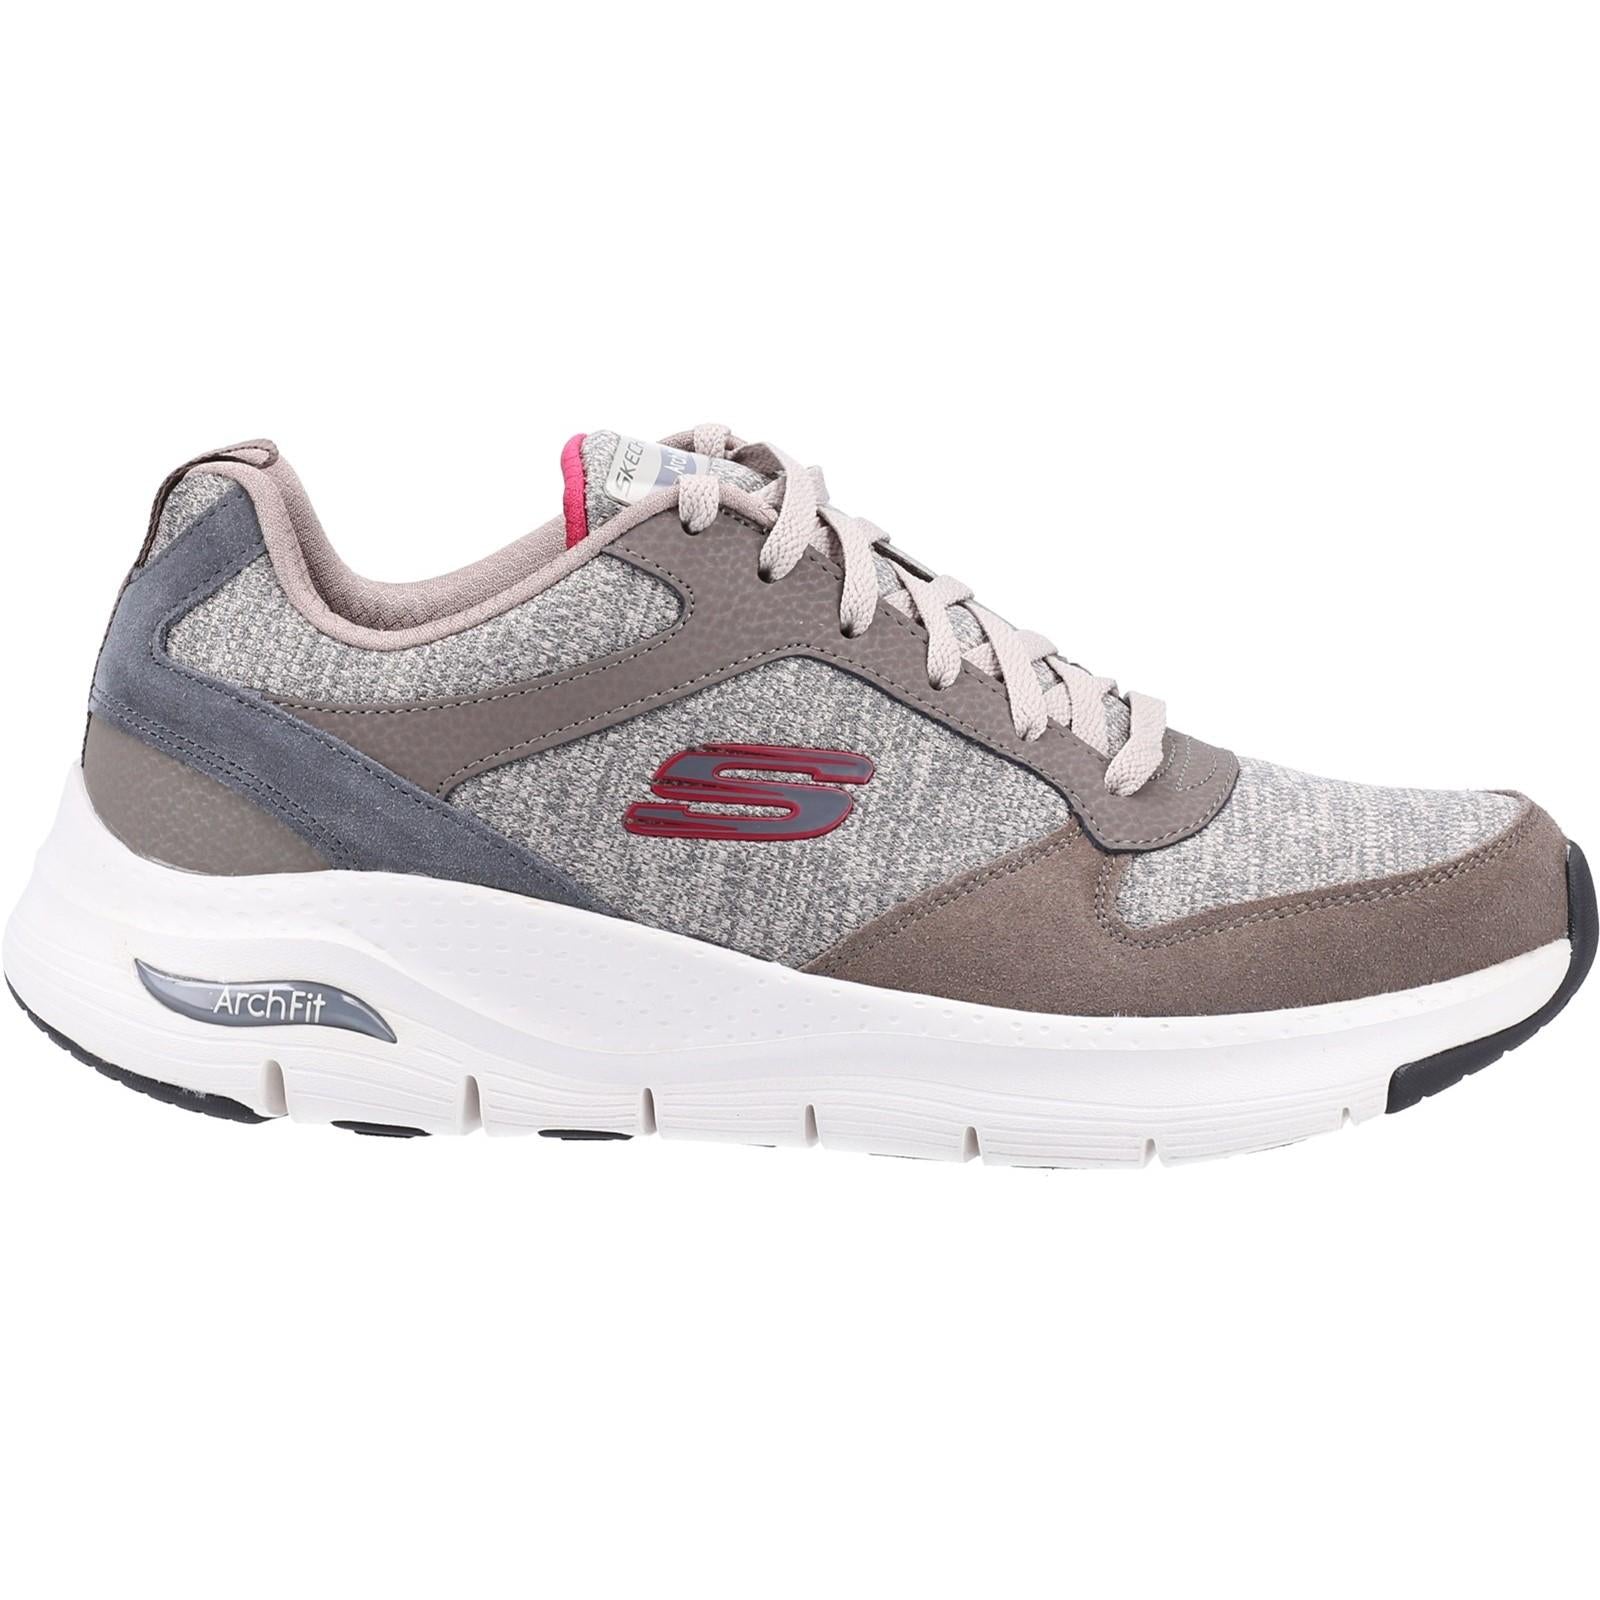 Skechers Arch Fit Trainer